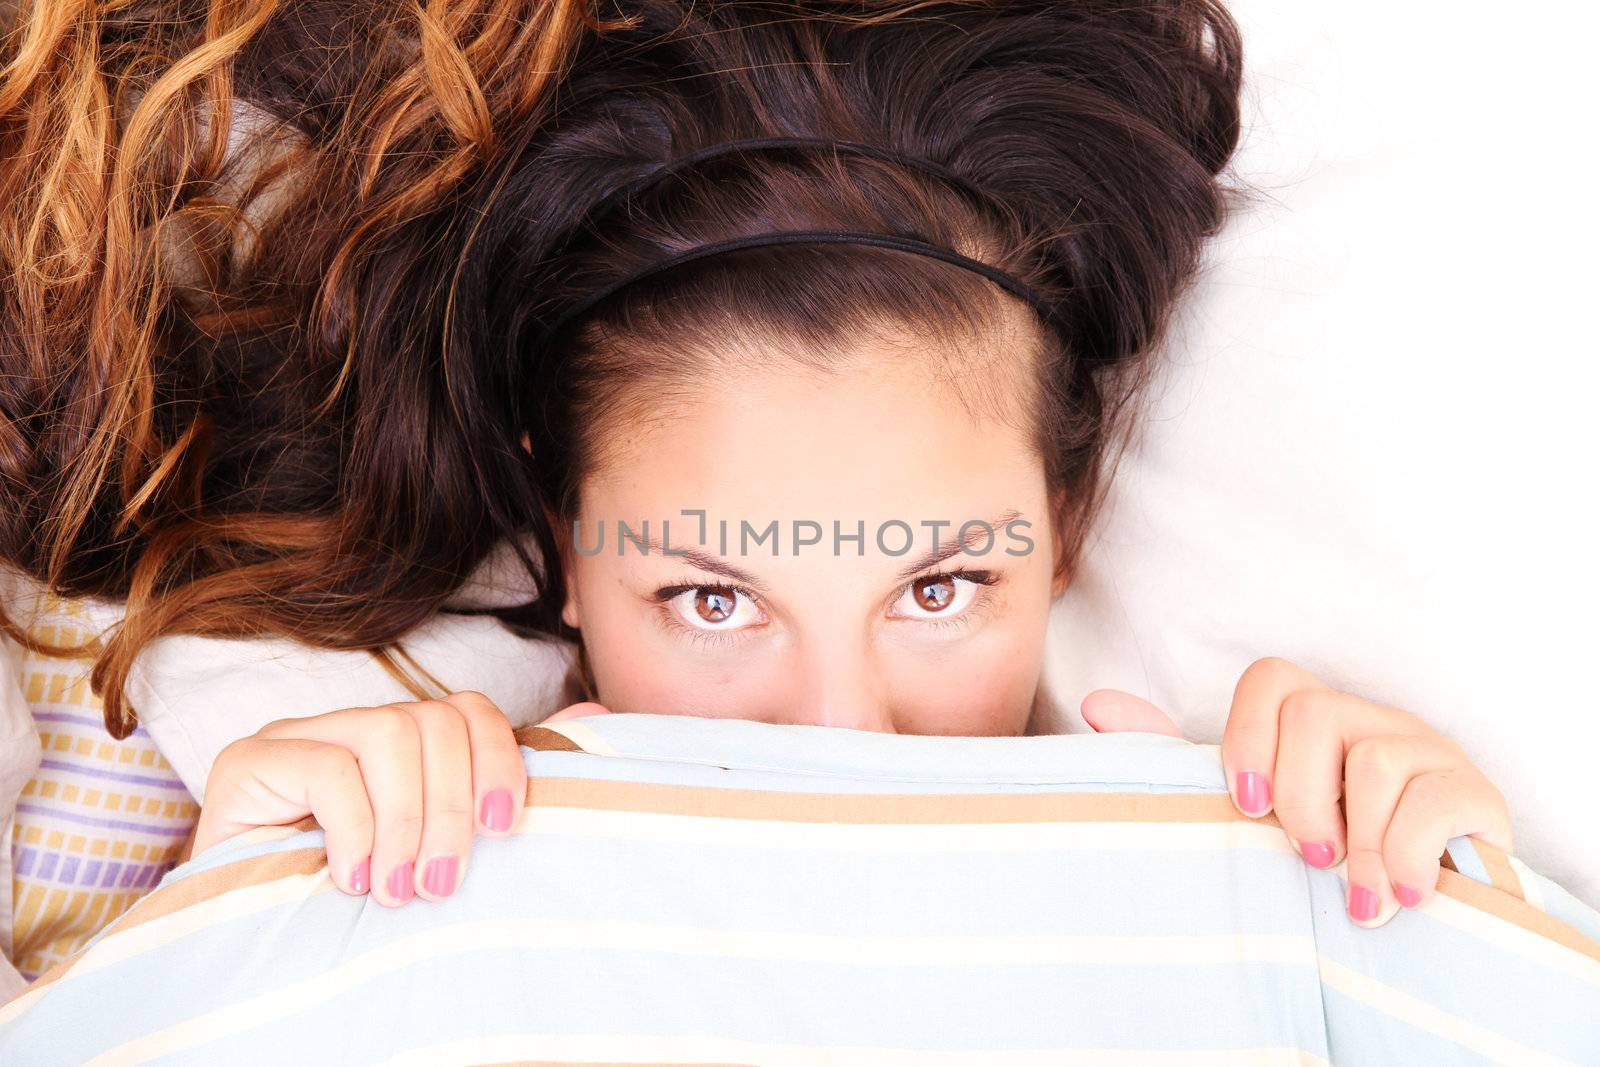 A young woman hiding under a blanket.